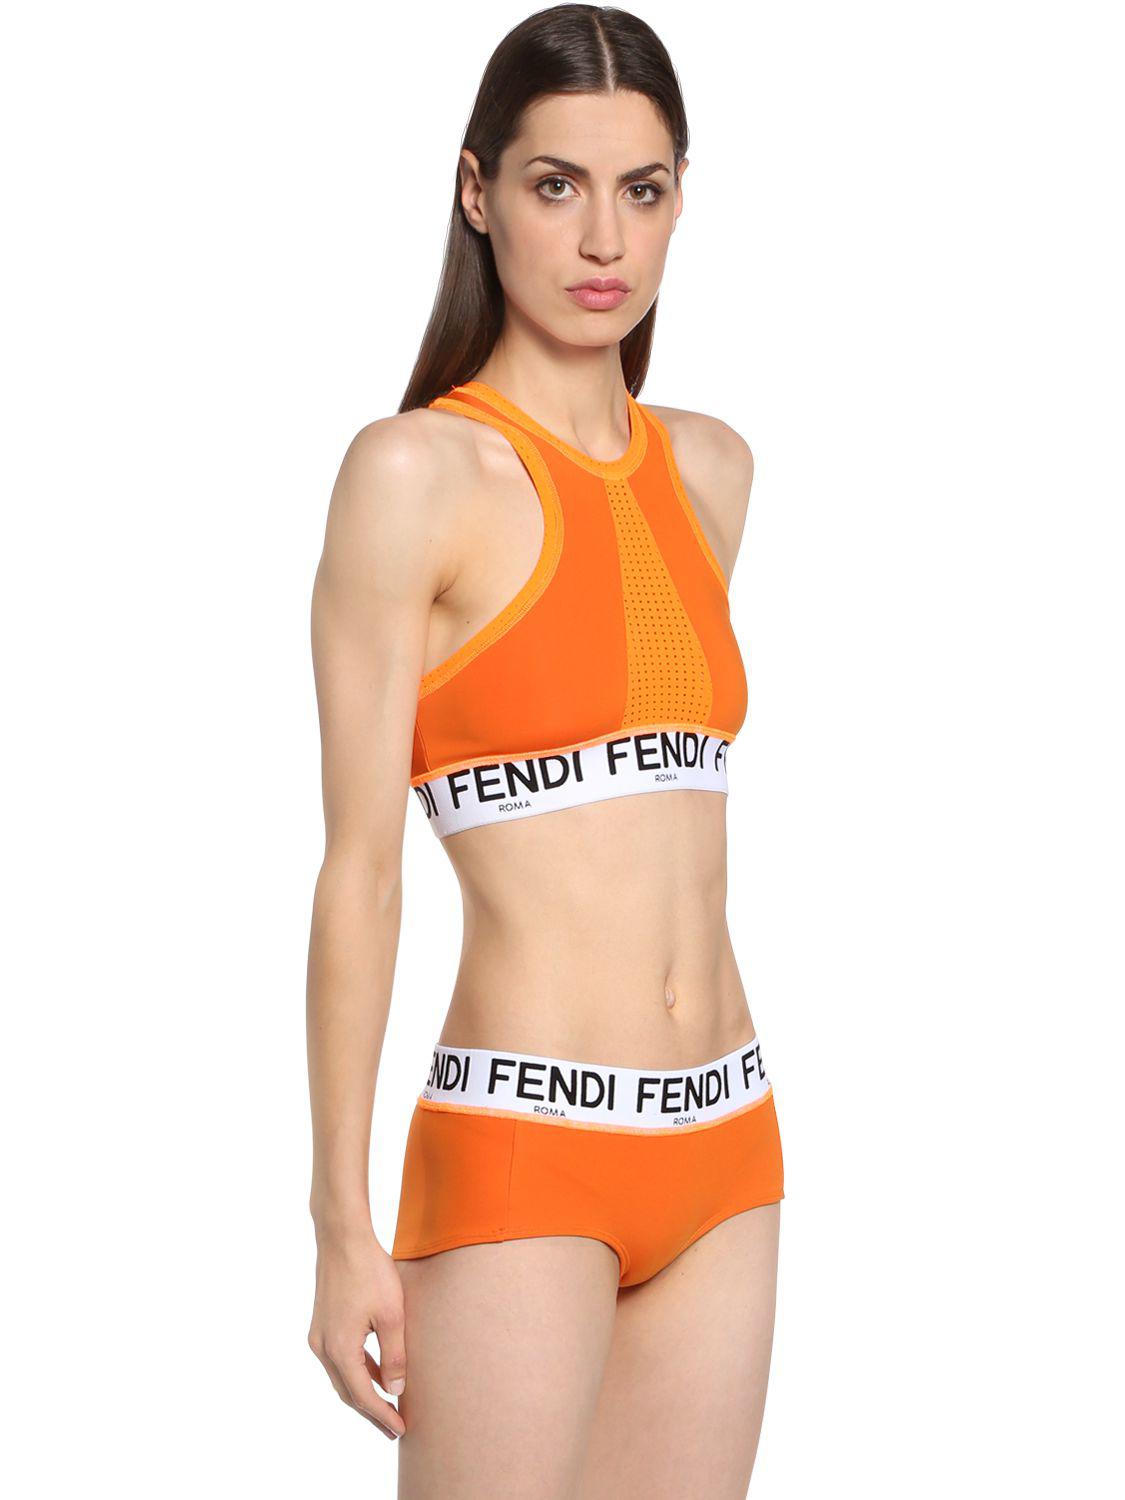 Fendi Sports Top For Sale Off 75